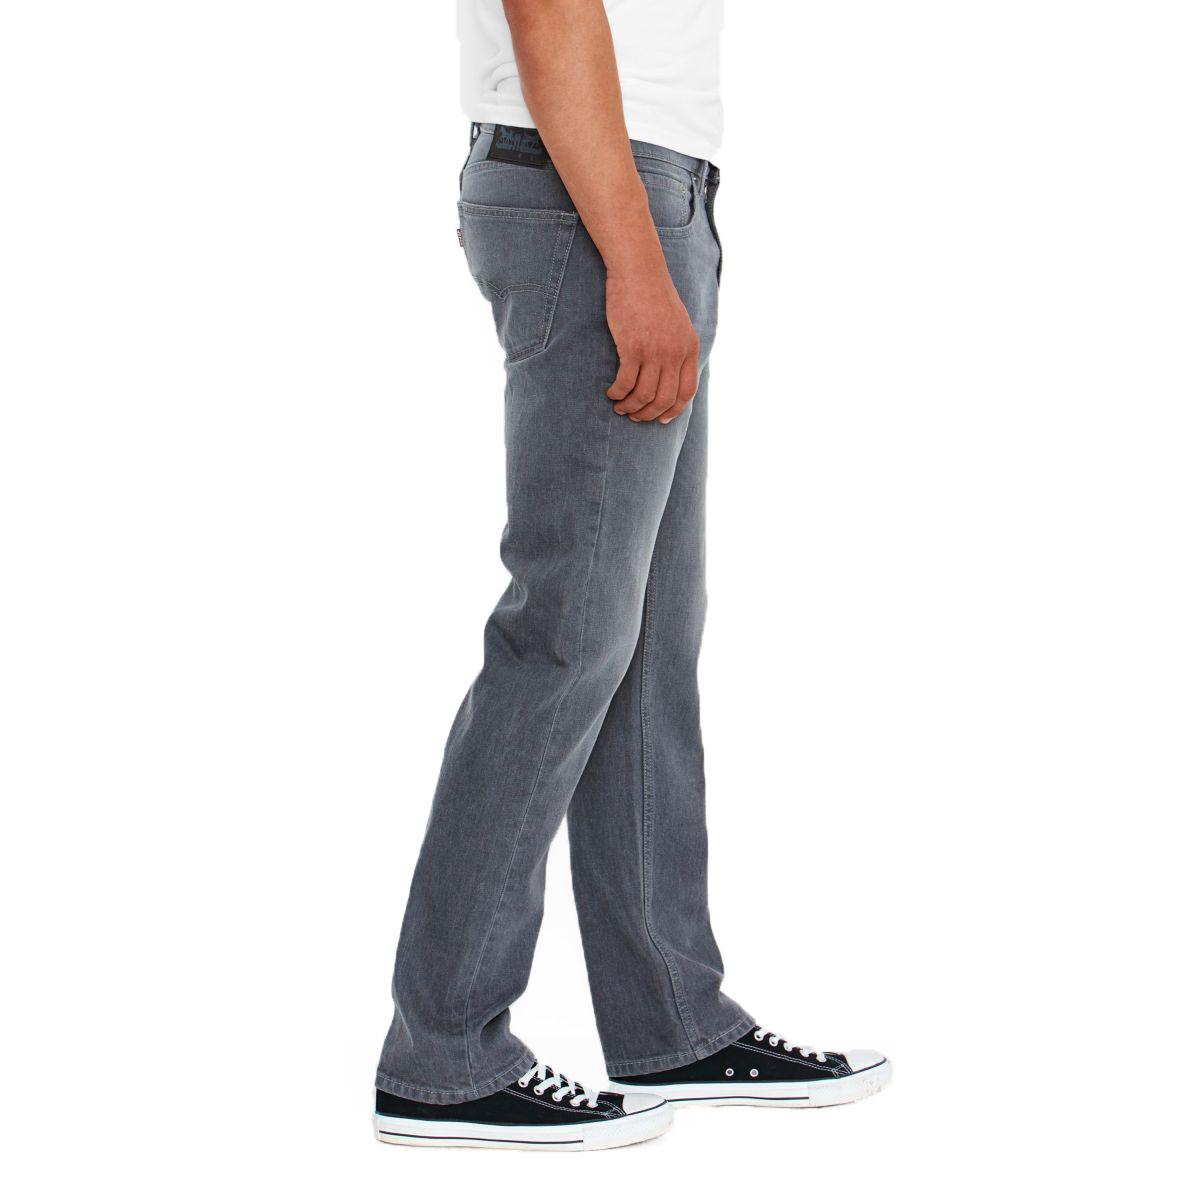 LEVI'S Men's 505 Regular Fit Jeans - Discontinued Style - Bob's Stores